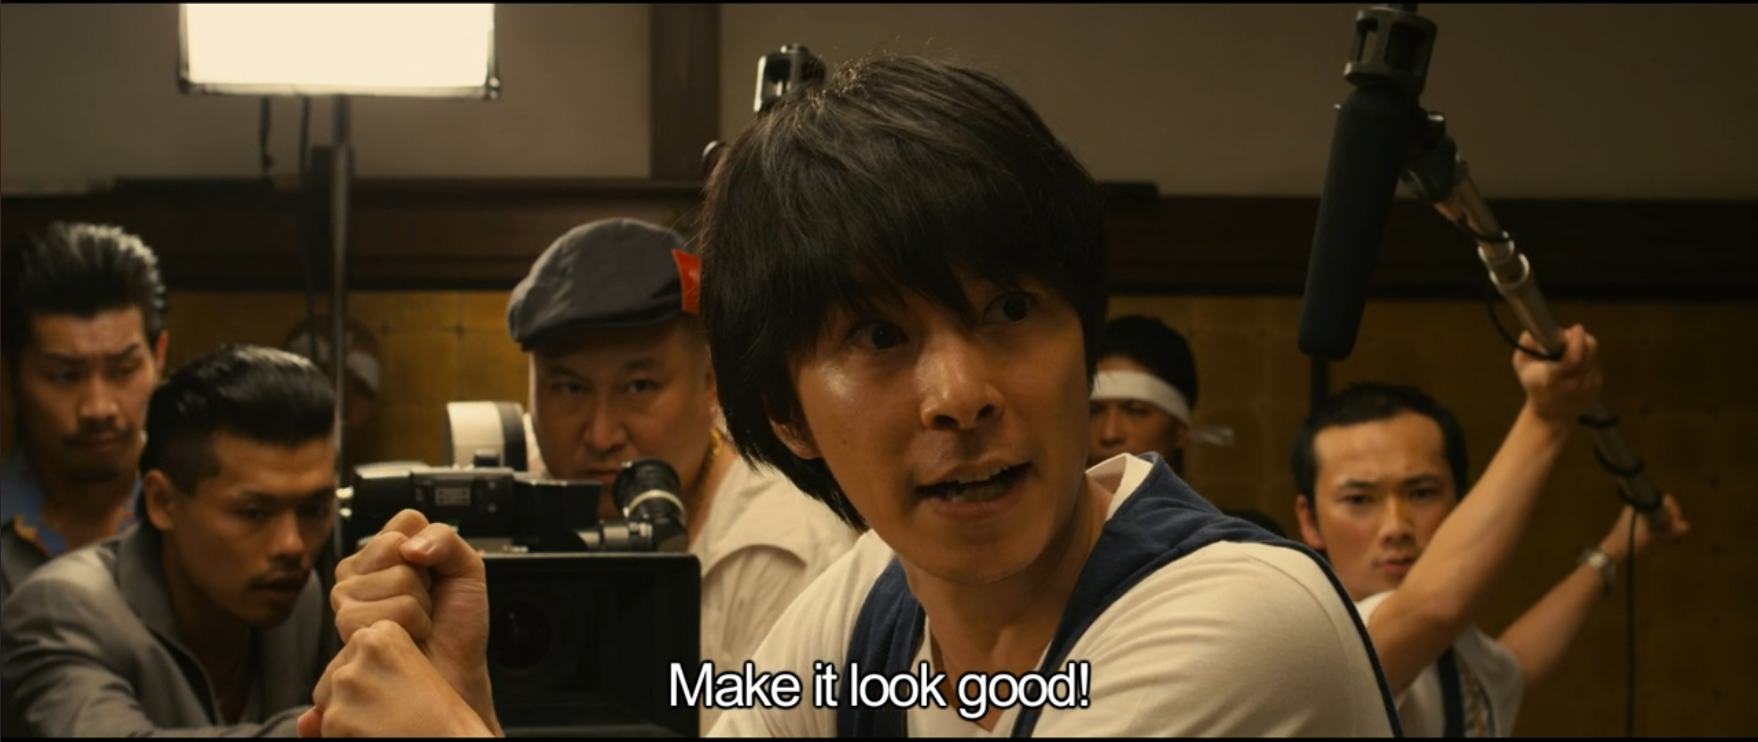 Hirata encourages the yakuza to make the battle as cool looking as possible.